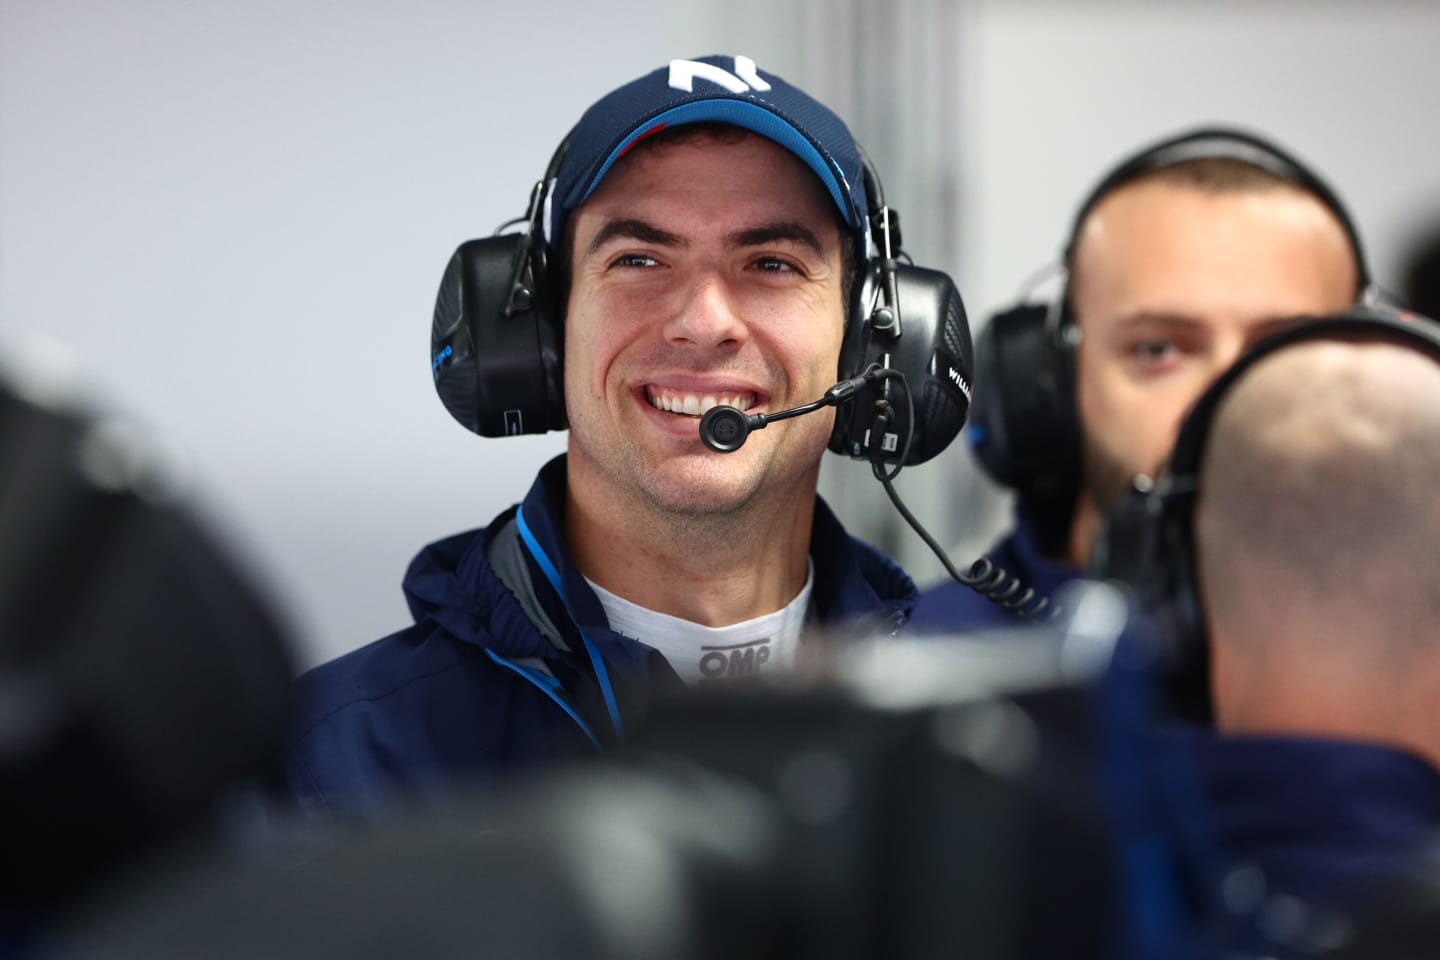 SUZUKA, JAPAN - OCTOBER 07: Nicholas Latifi of Canada and Williams looks on in the garage during practice ahead of the F1 Grand Prix of Japan at Suzuka International Racing Course on October 07, 2022 in Suzuka, Japan. (Photo by Clive Rose/Getty Images)